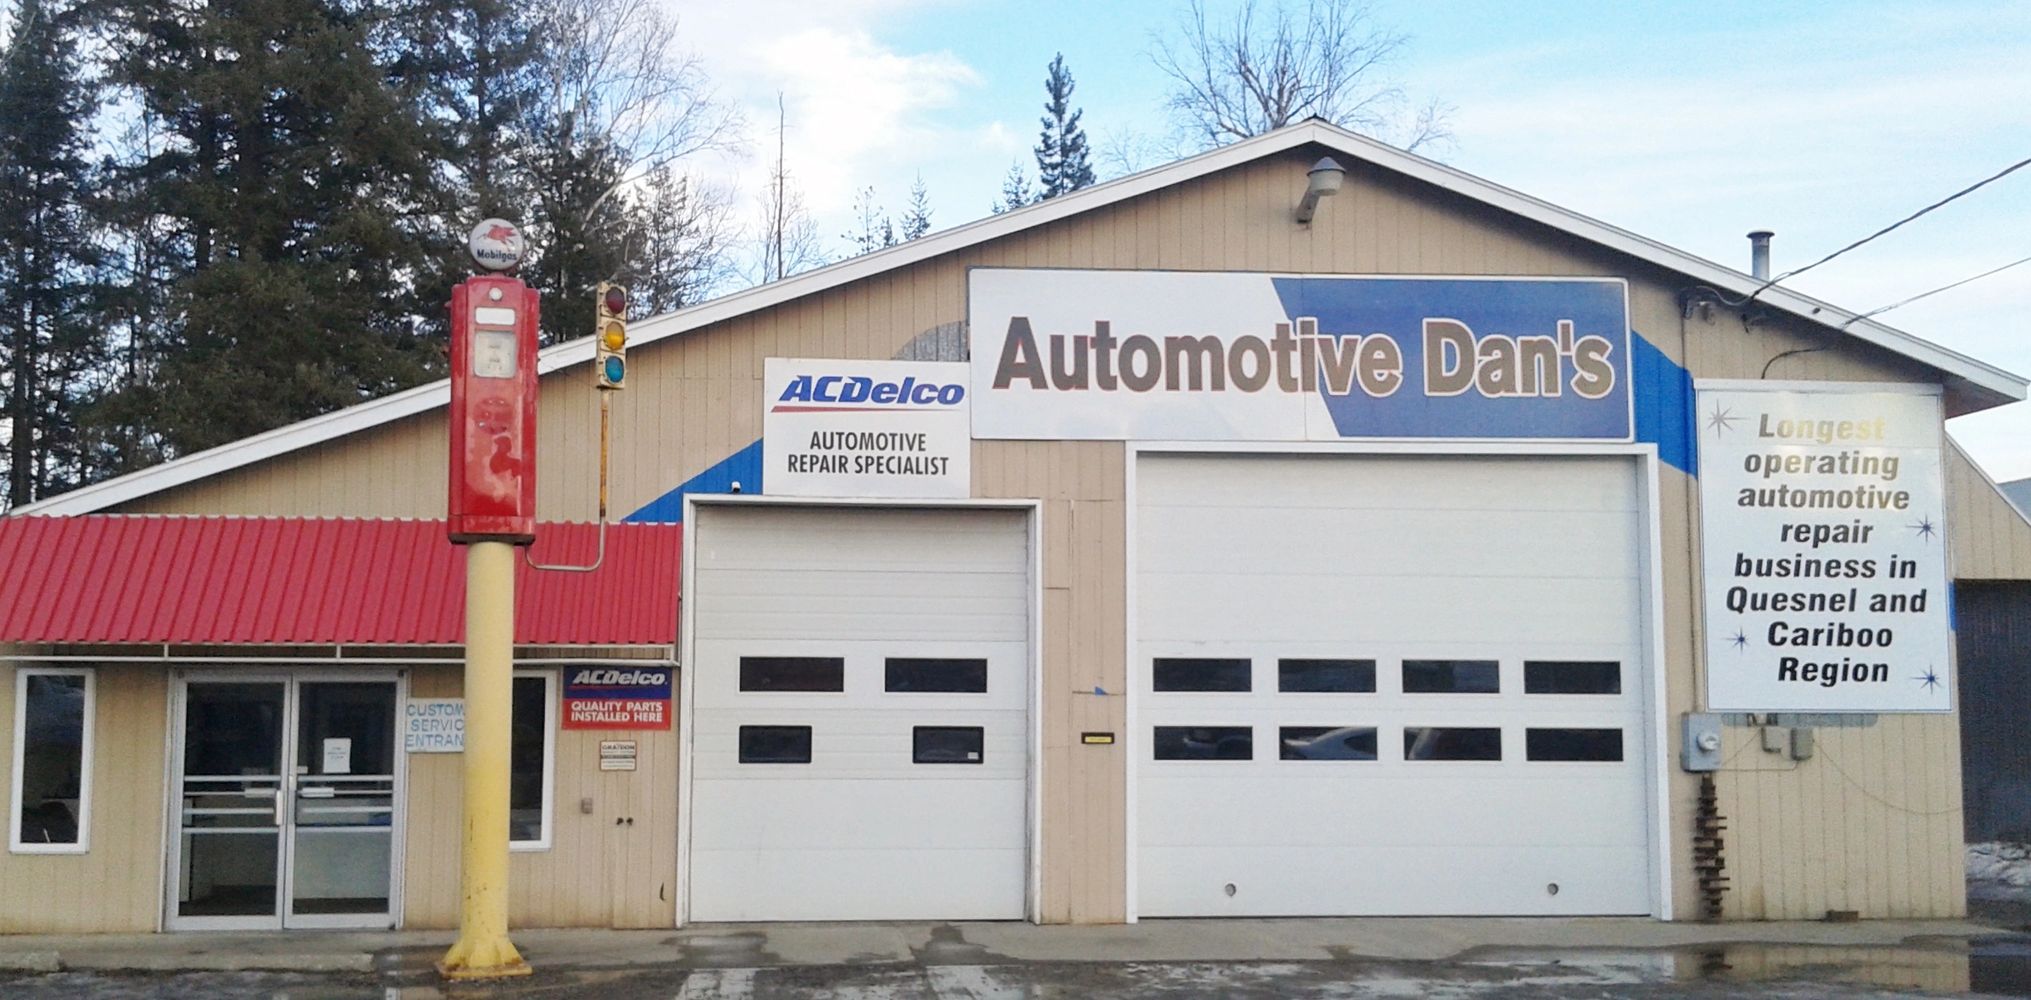 THE BEST AUTO REPAIR SHOP IN QUESNEL BC